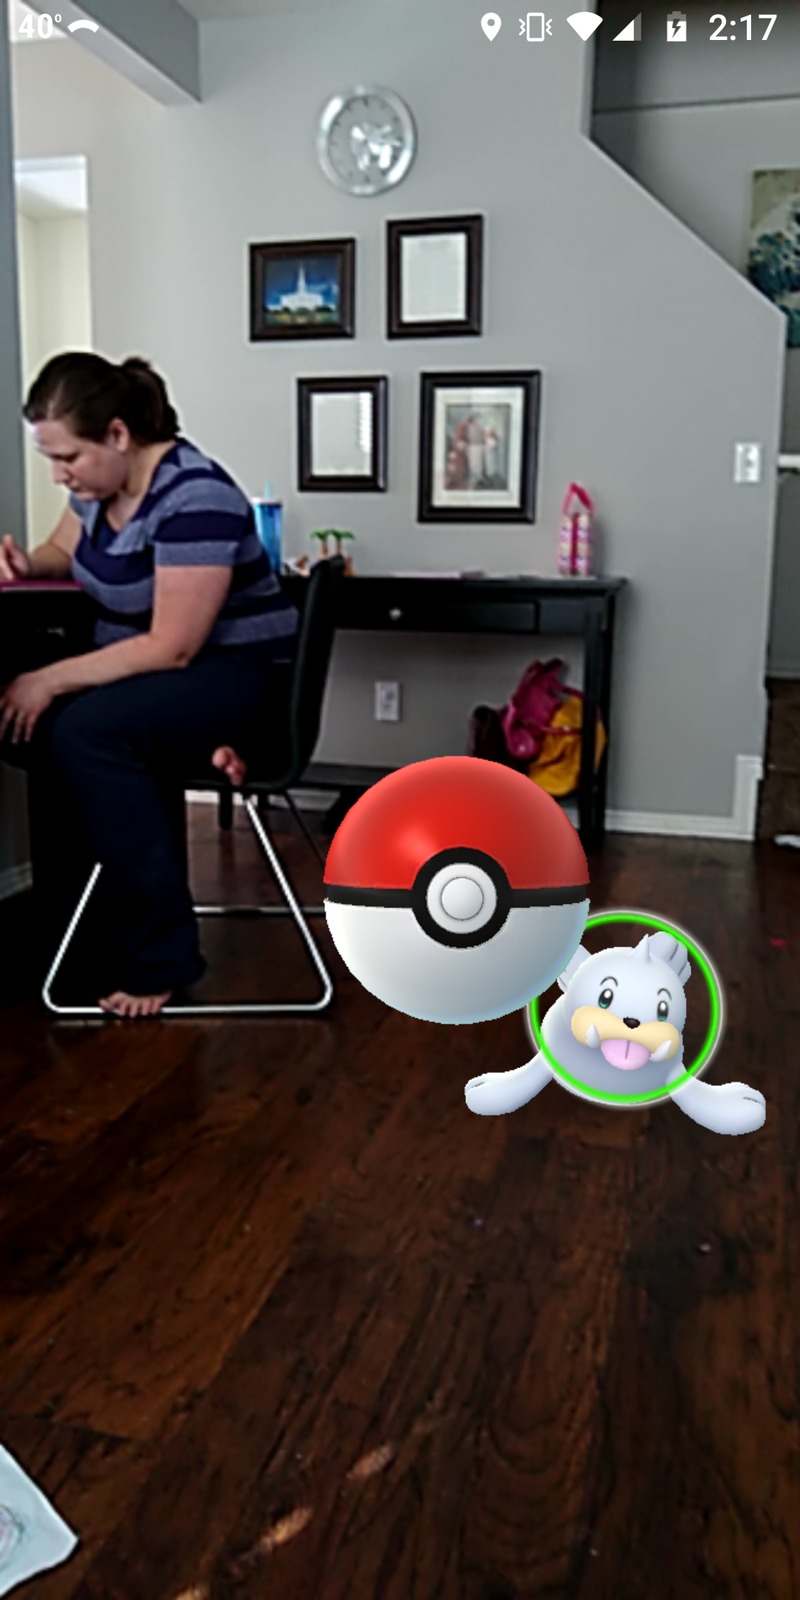 Lois found this lovely Pokemon in Stacia's living room.